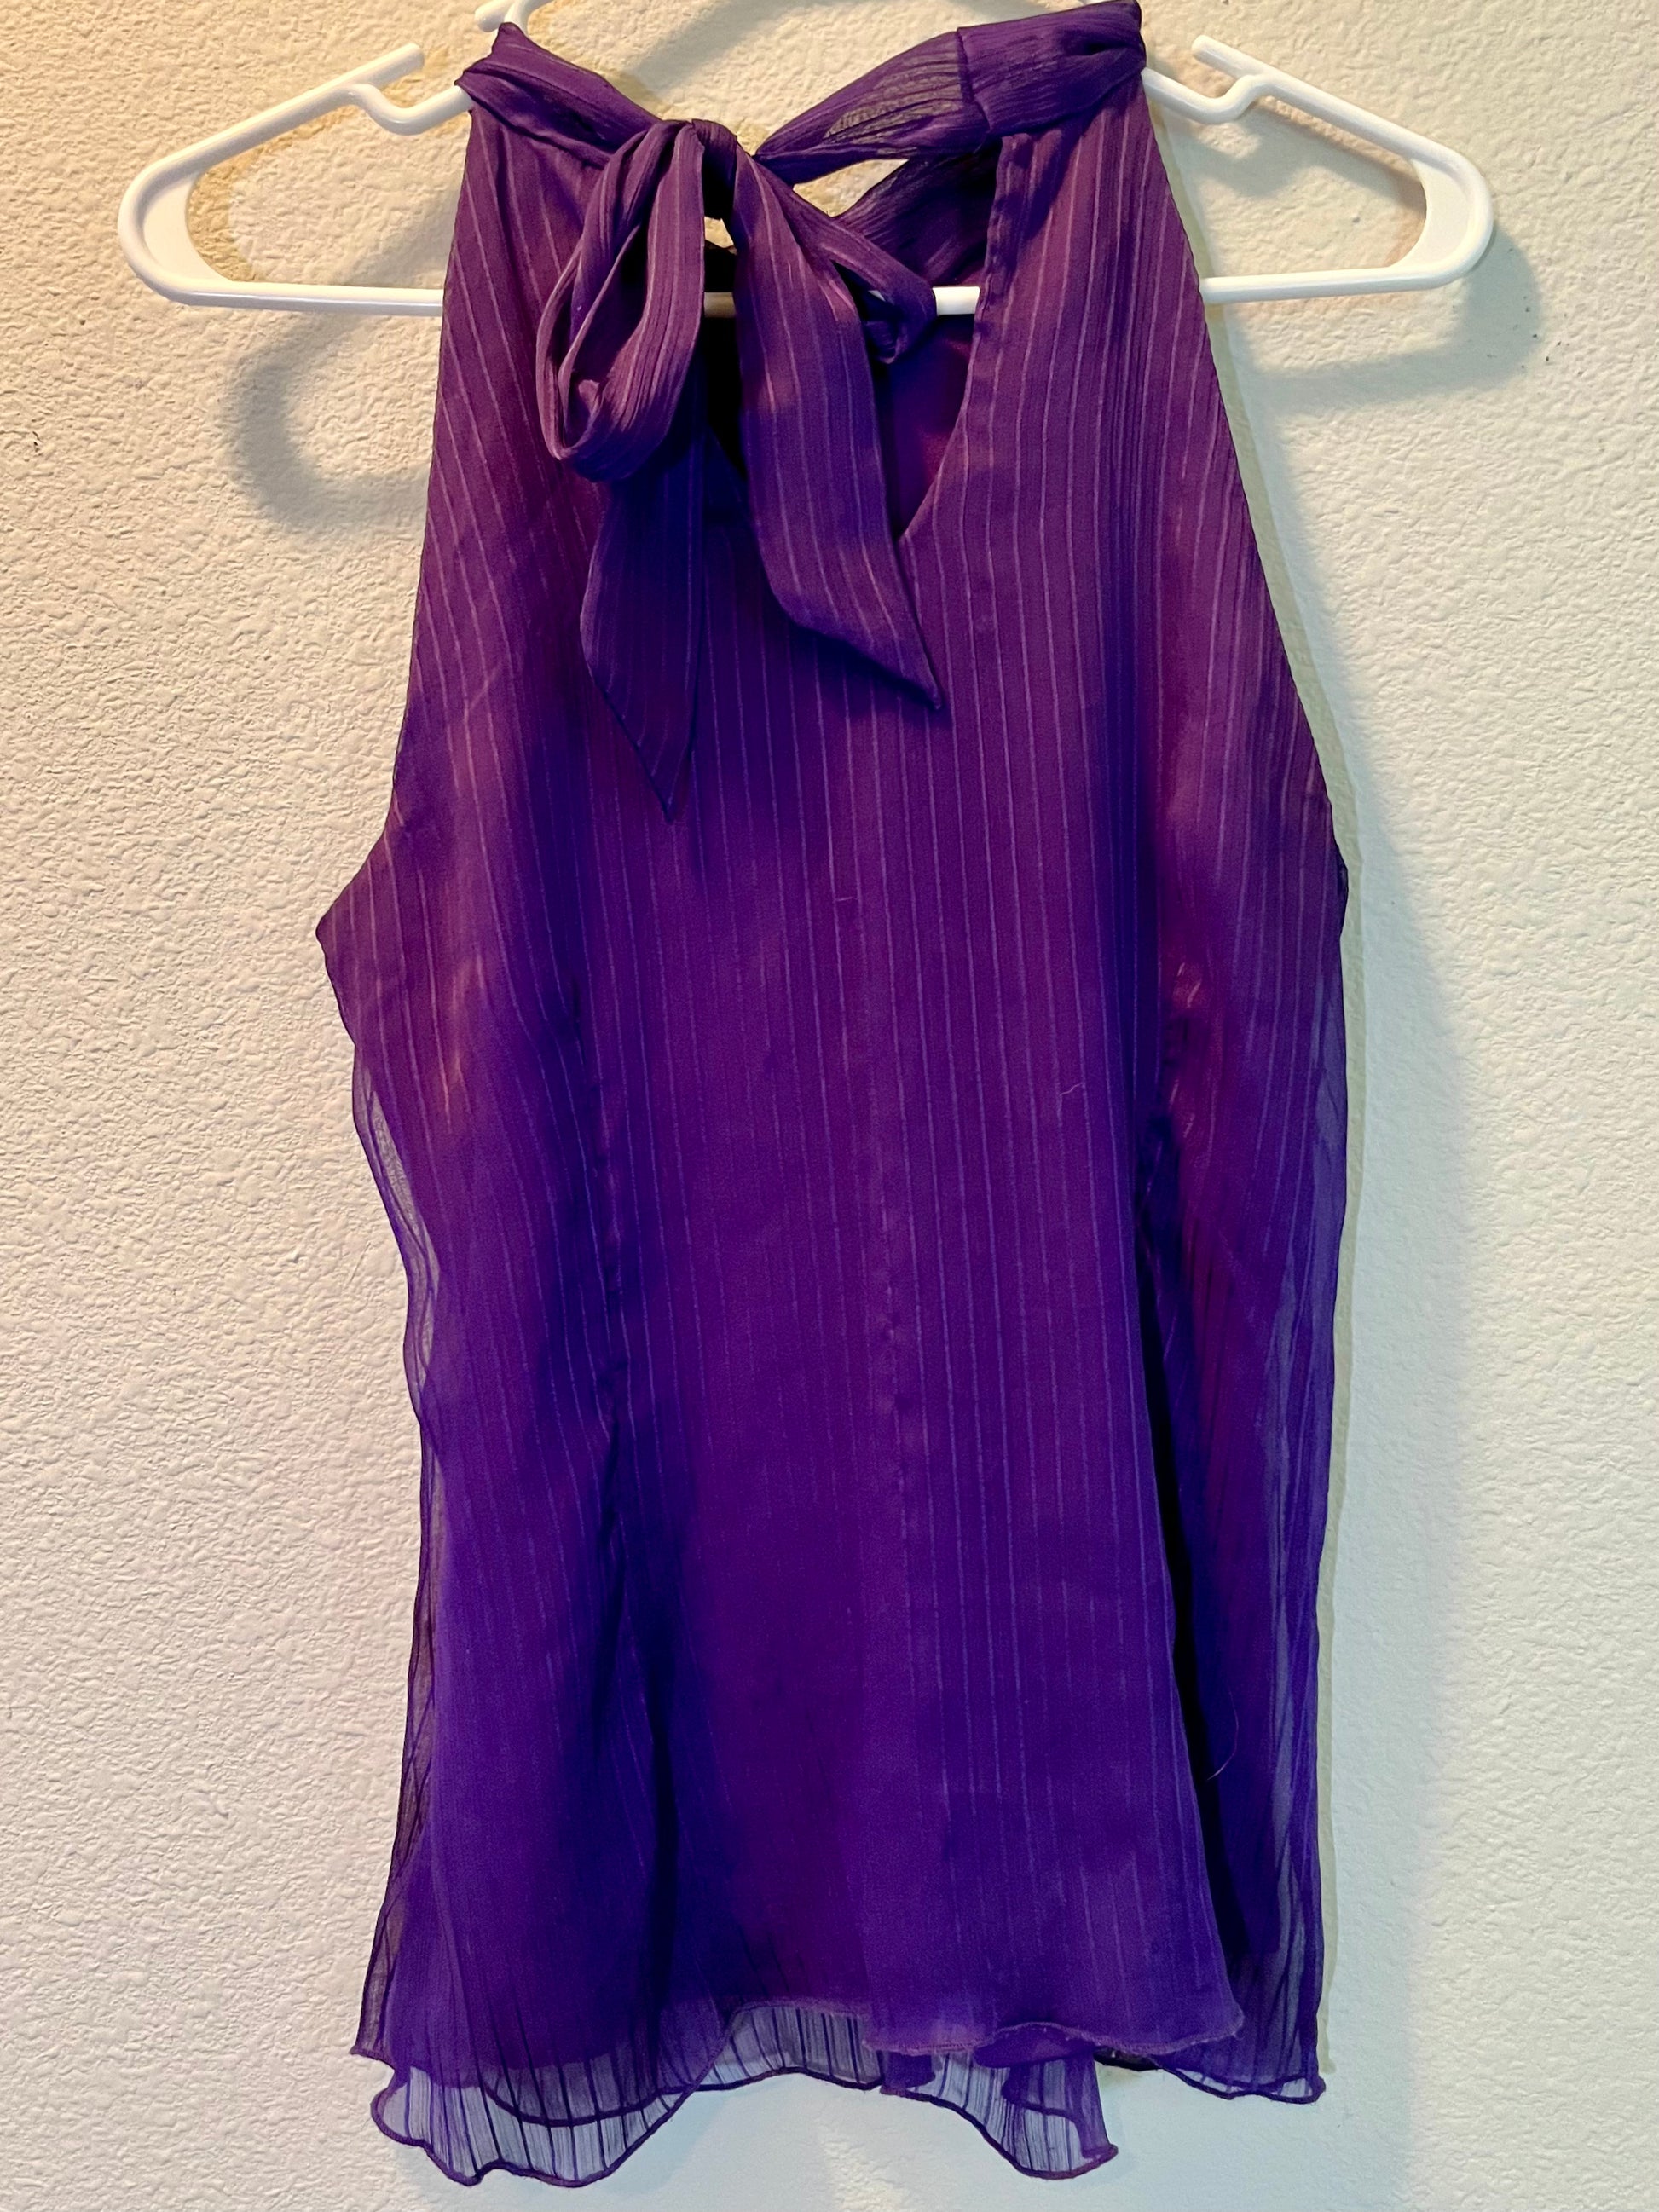 Light and Airy Purple Ruffle Blouse Size Large - Tales from the Tangle